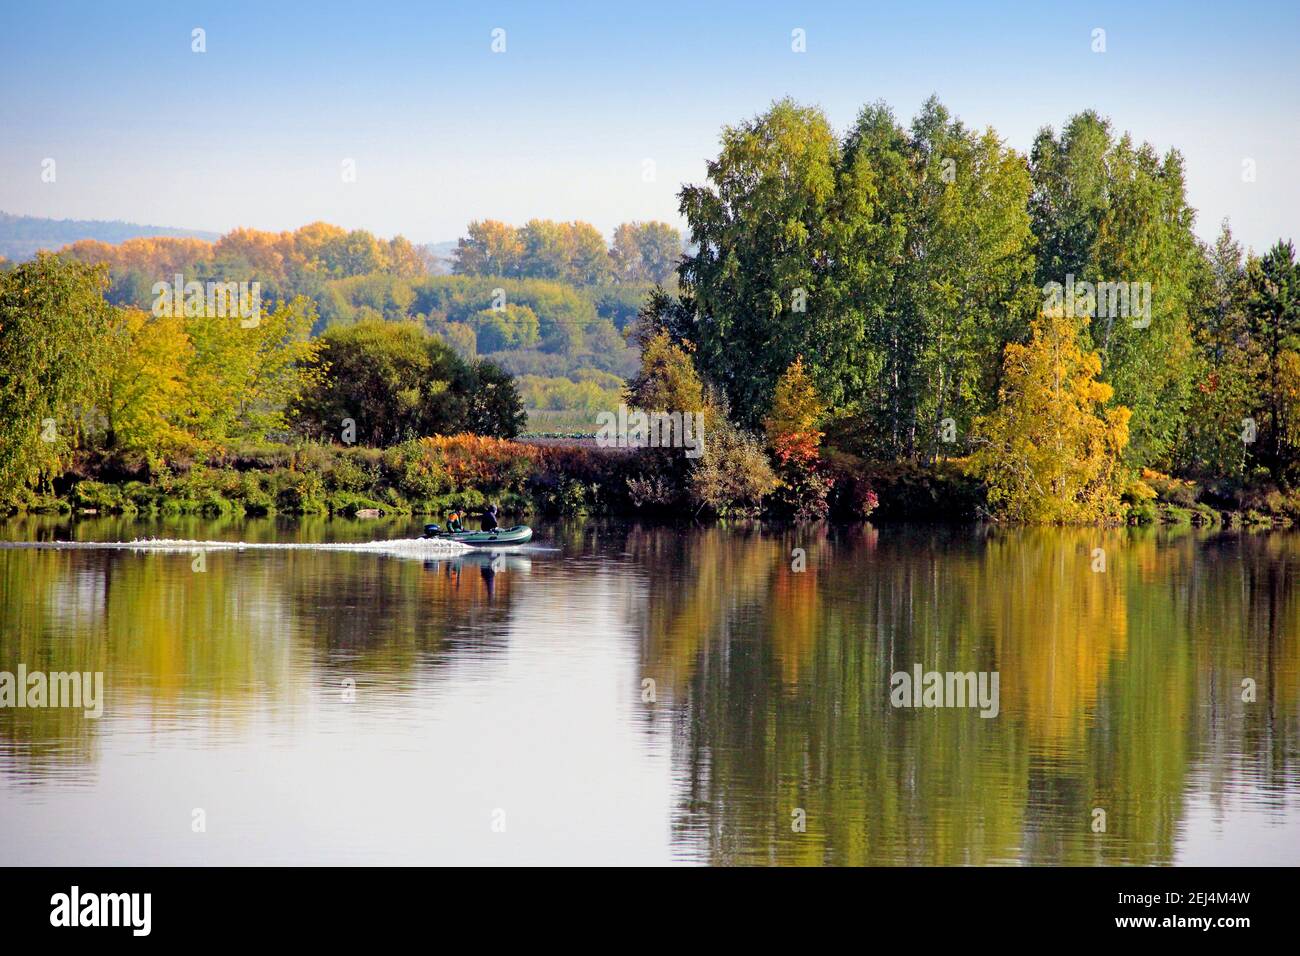 Calmness river surface disturbs driving motor boat. Wonderful landscape of autumn forest on the background. Stock Photo